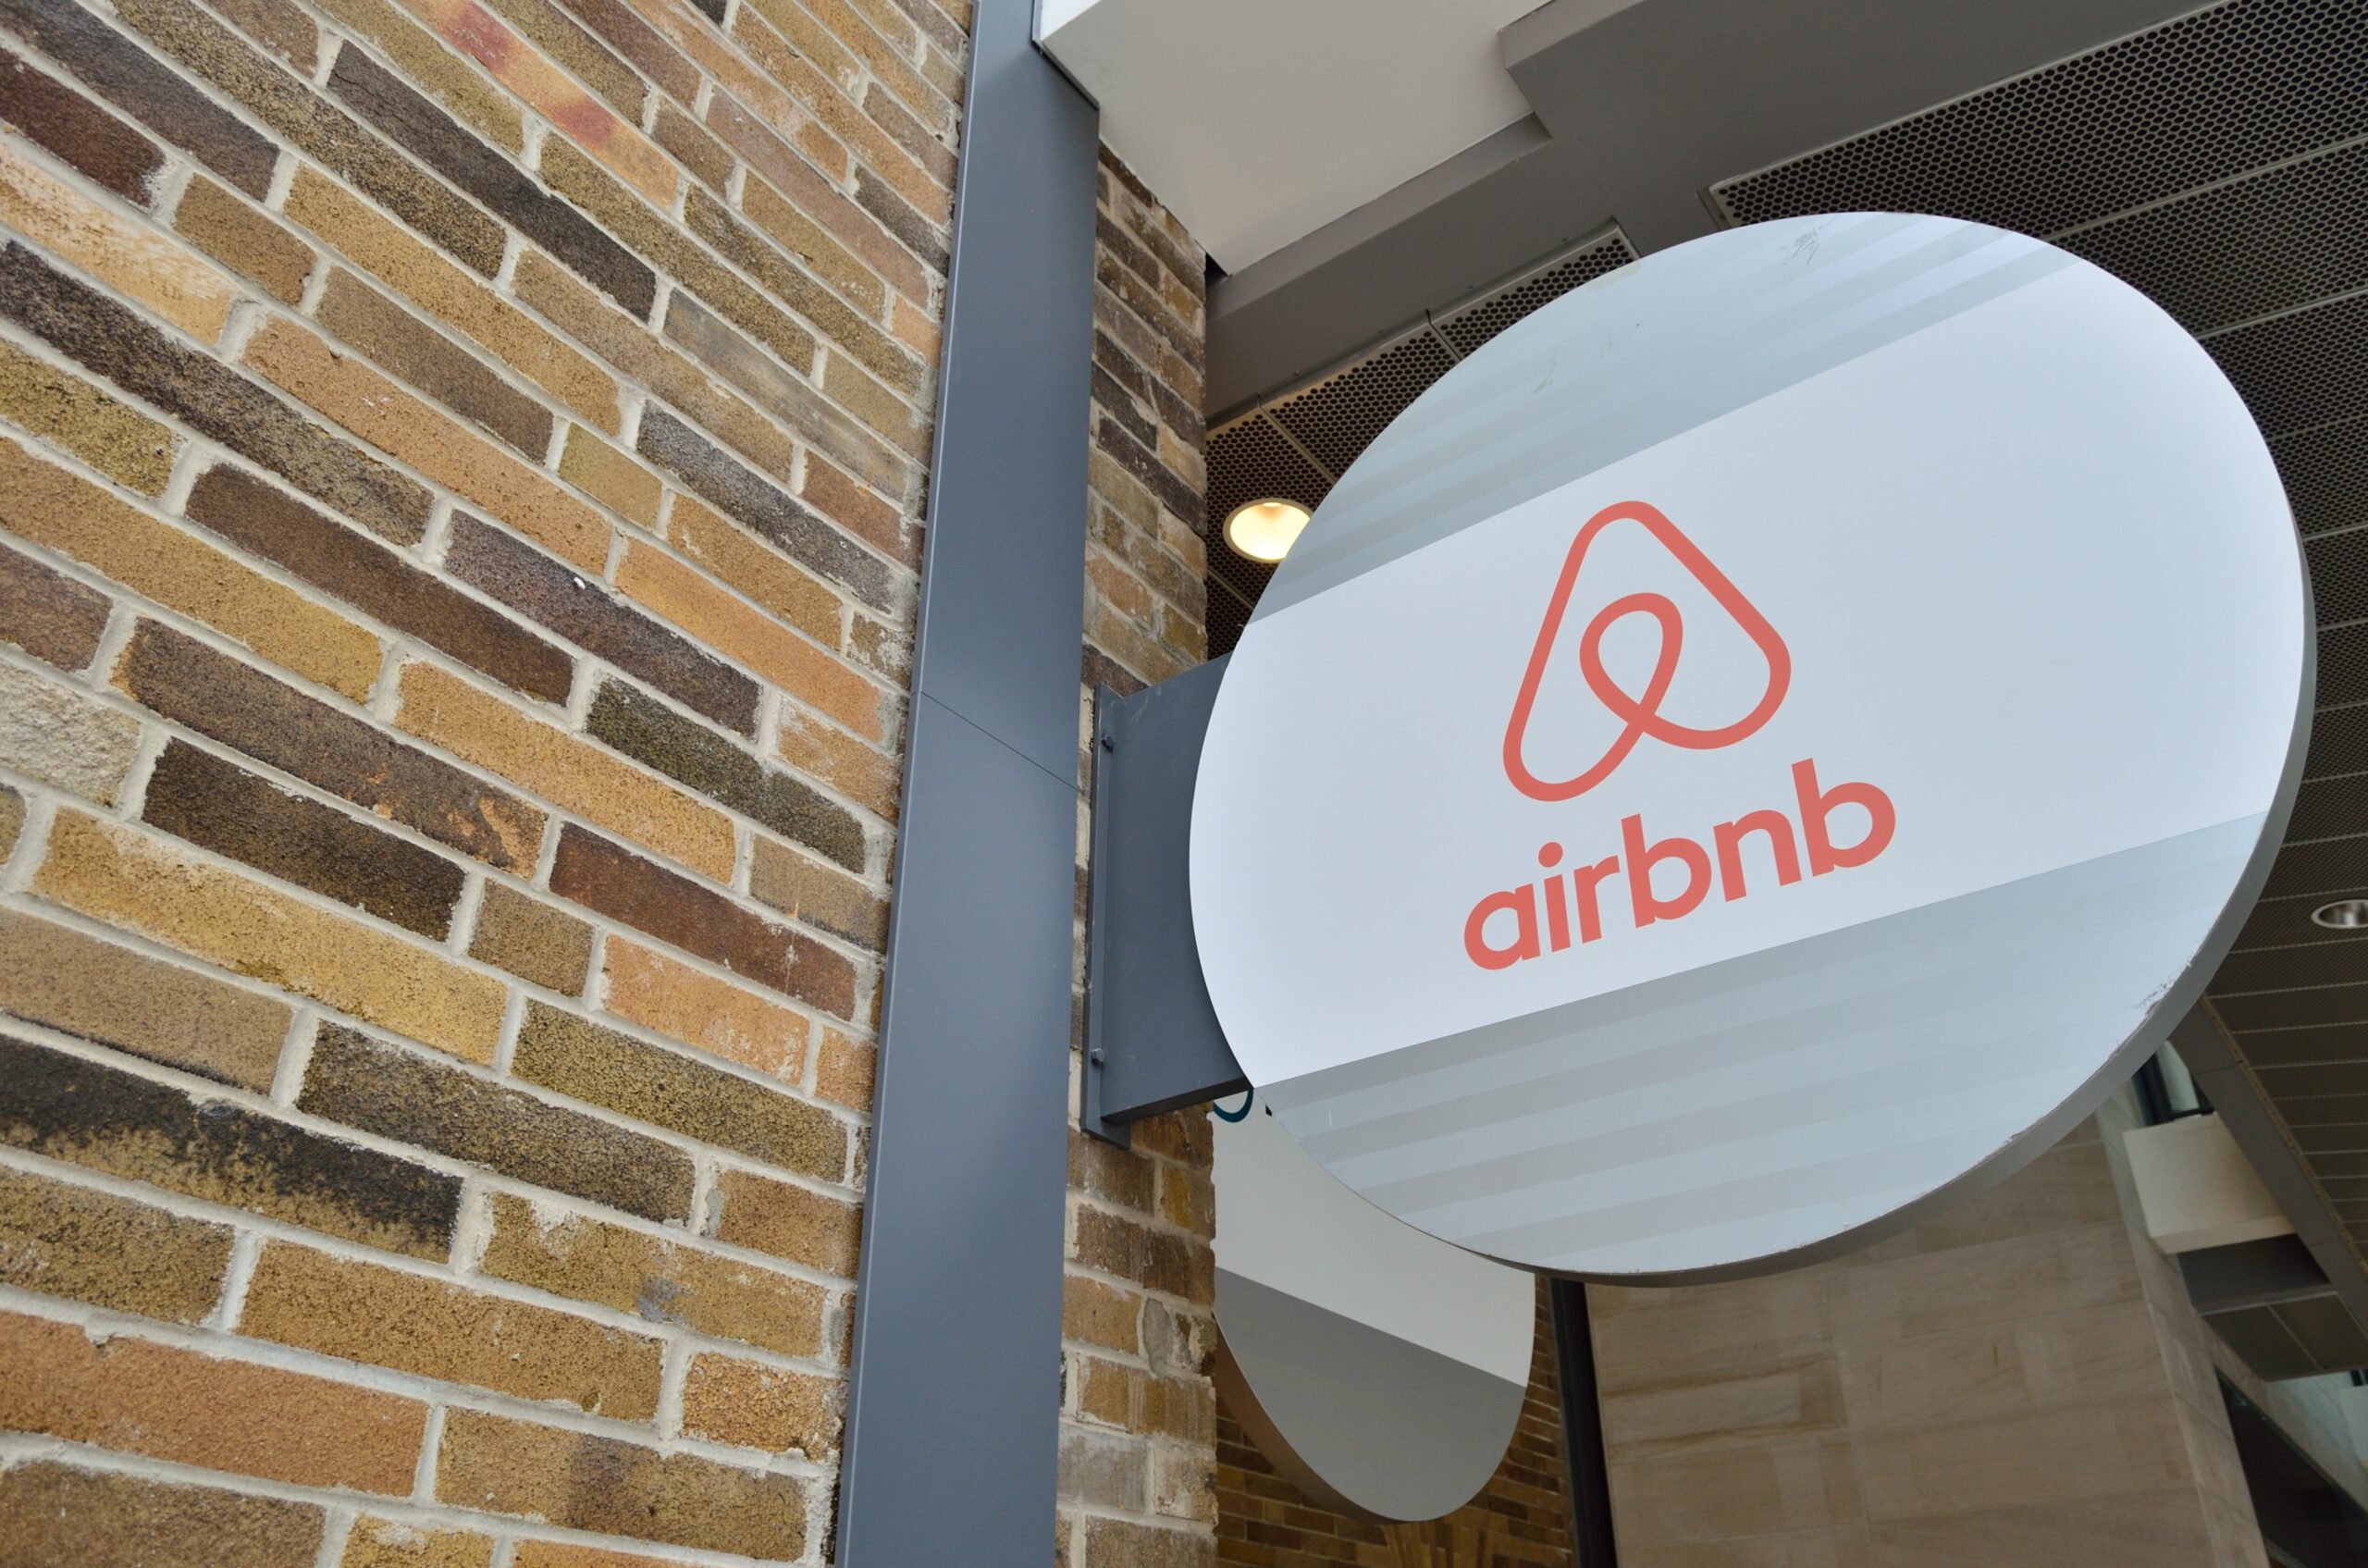 "Airbnb" sign